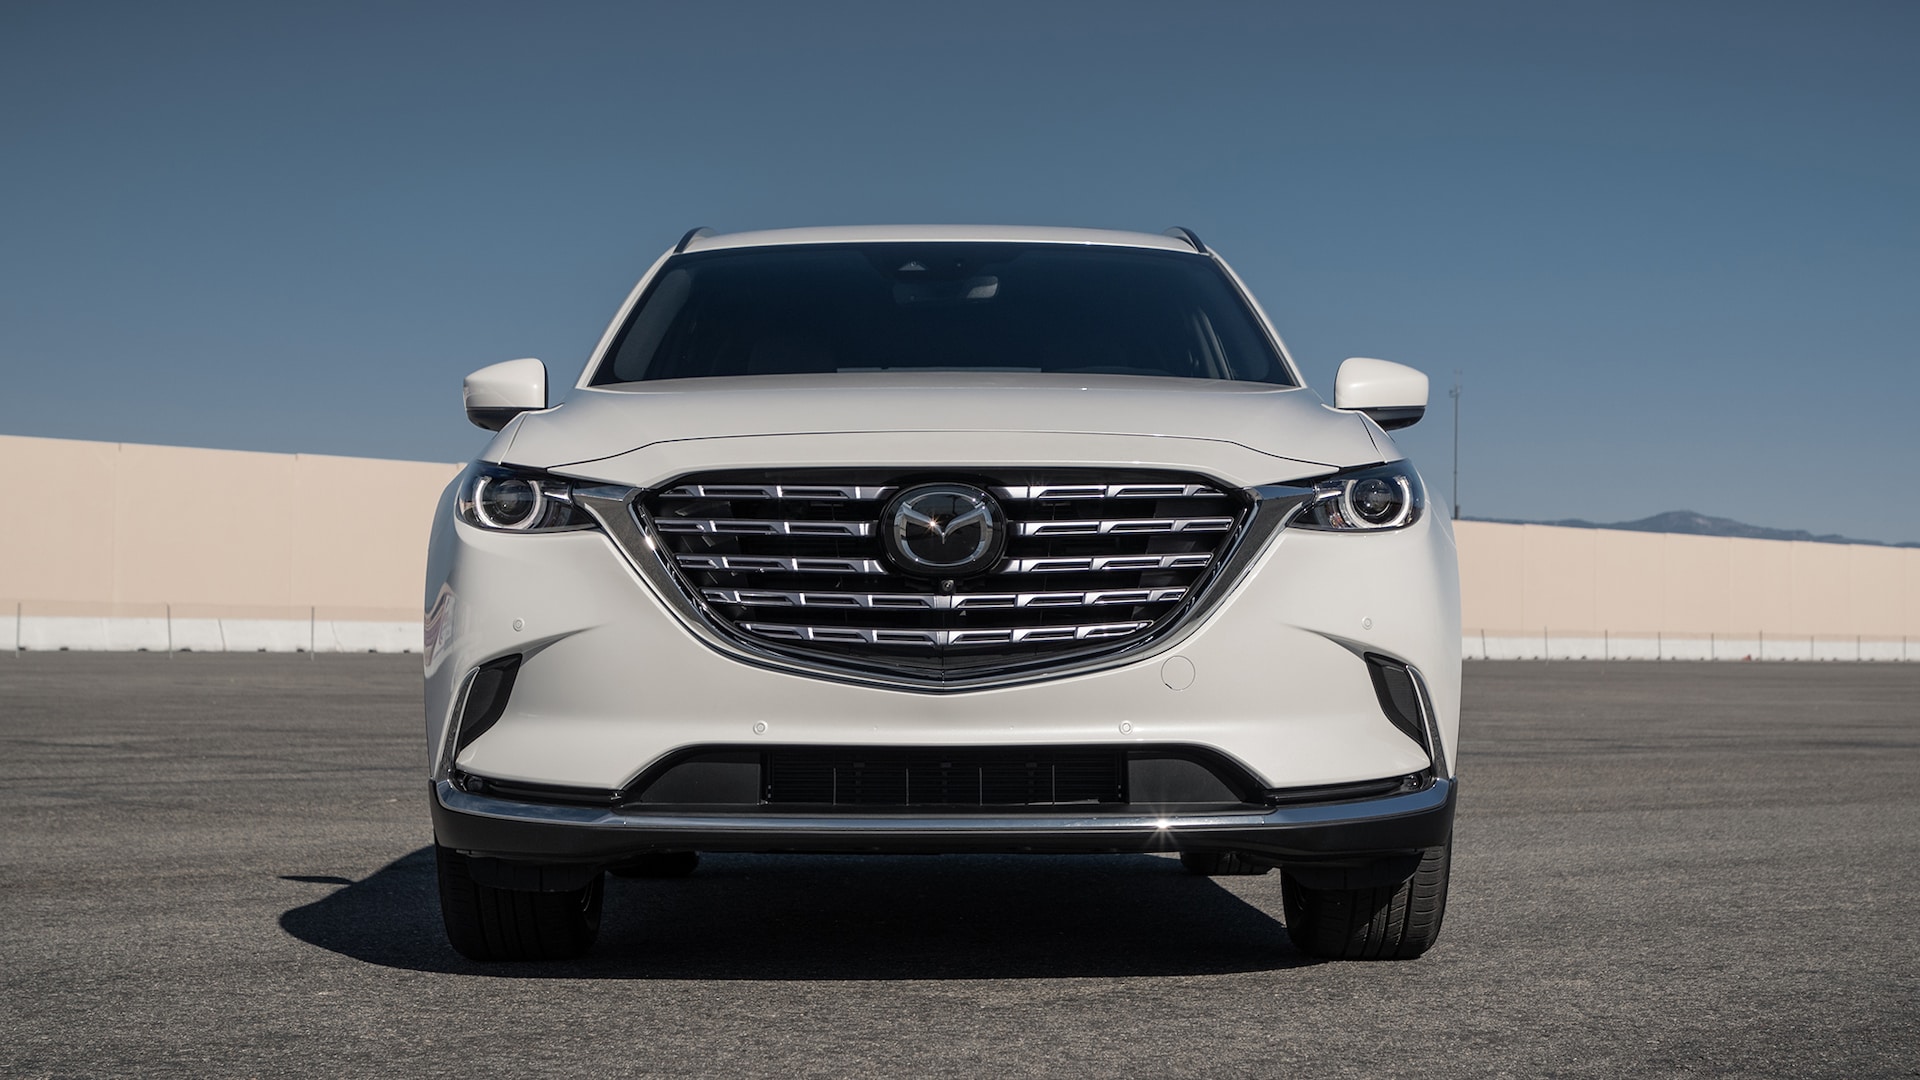 Future Cars: The 2023 Mazda CX-7 Is the Cavalry the Brand Needs